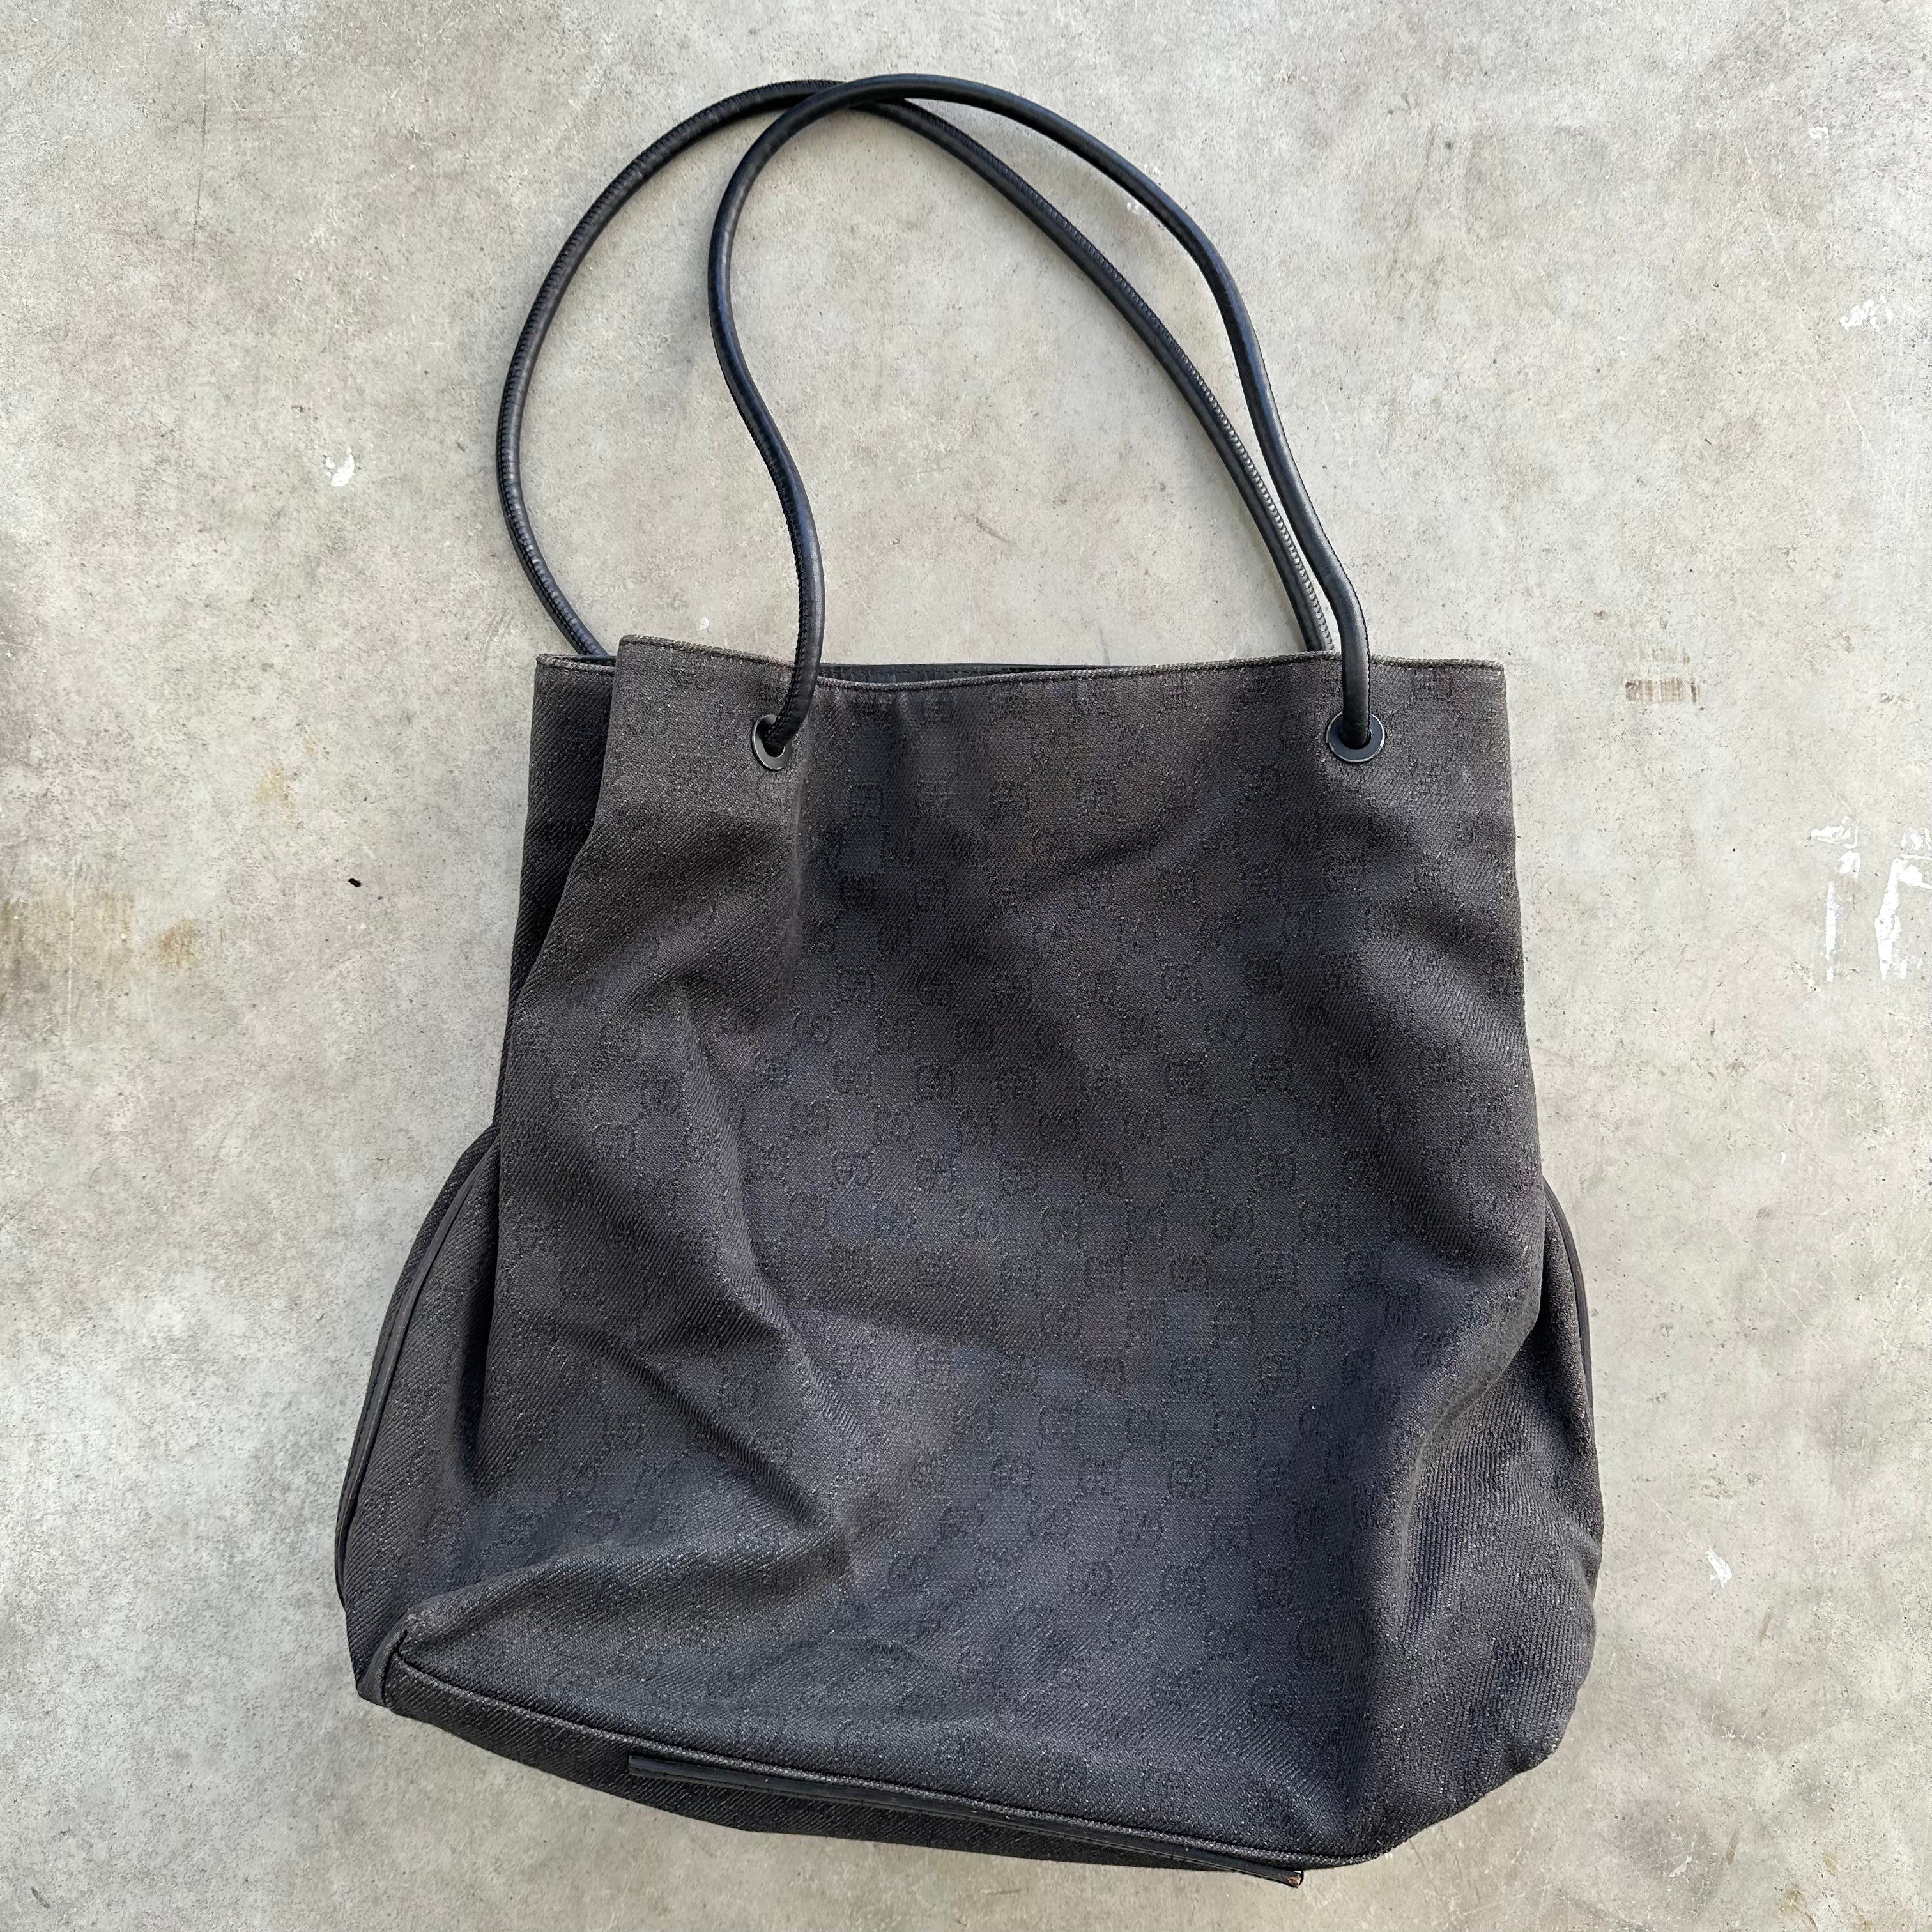 Gucci Leather Rope Tote Bag Canvas Black